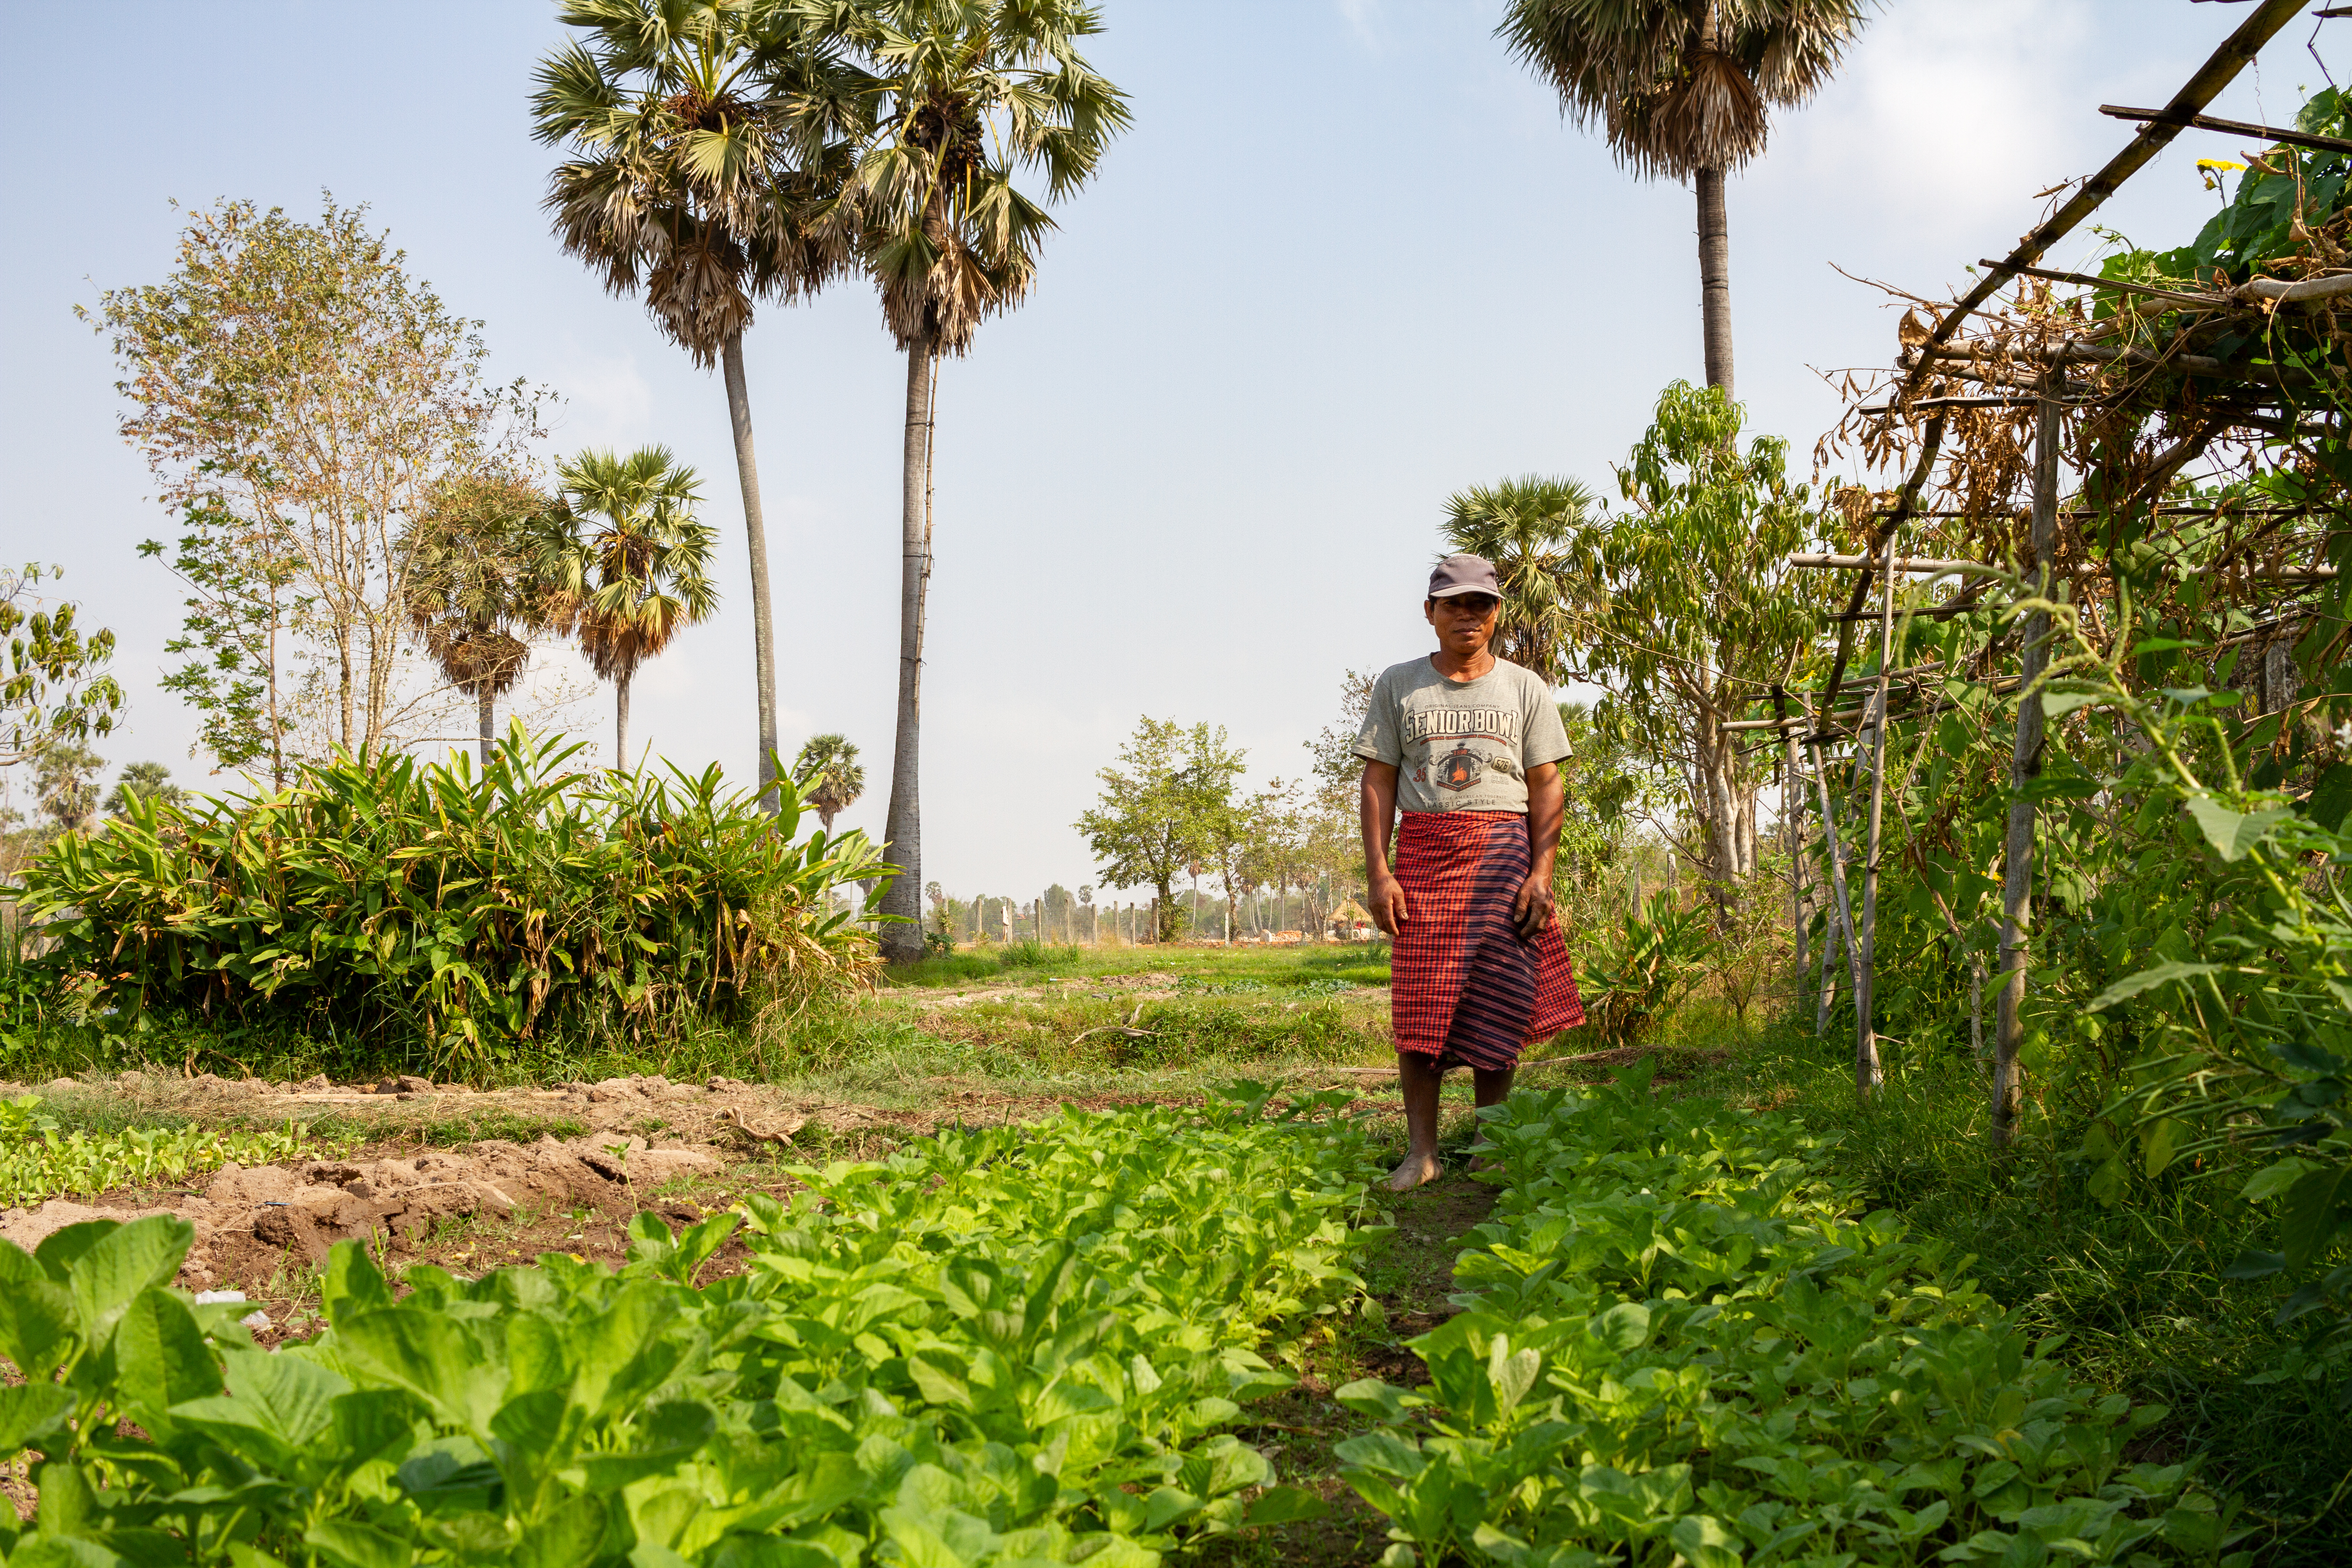 Picture of Hong Saron, a farmer supported by MCC partner Organization to Develop Our Villages (ODOV), stands in his garden that he tends with his wife Khun Muen in Tultary village, Mesang district, Cambodia. In this garden, he grows a wide variety of vegetables both for household consumption and for sale in the local market.